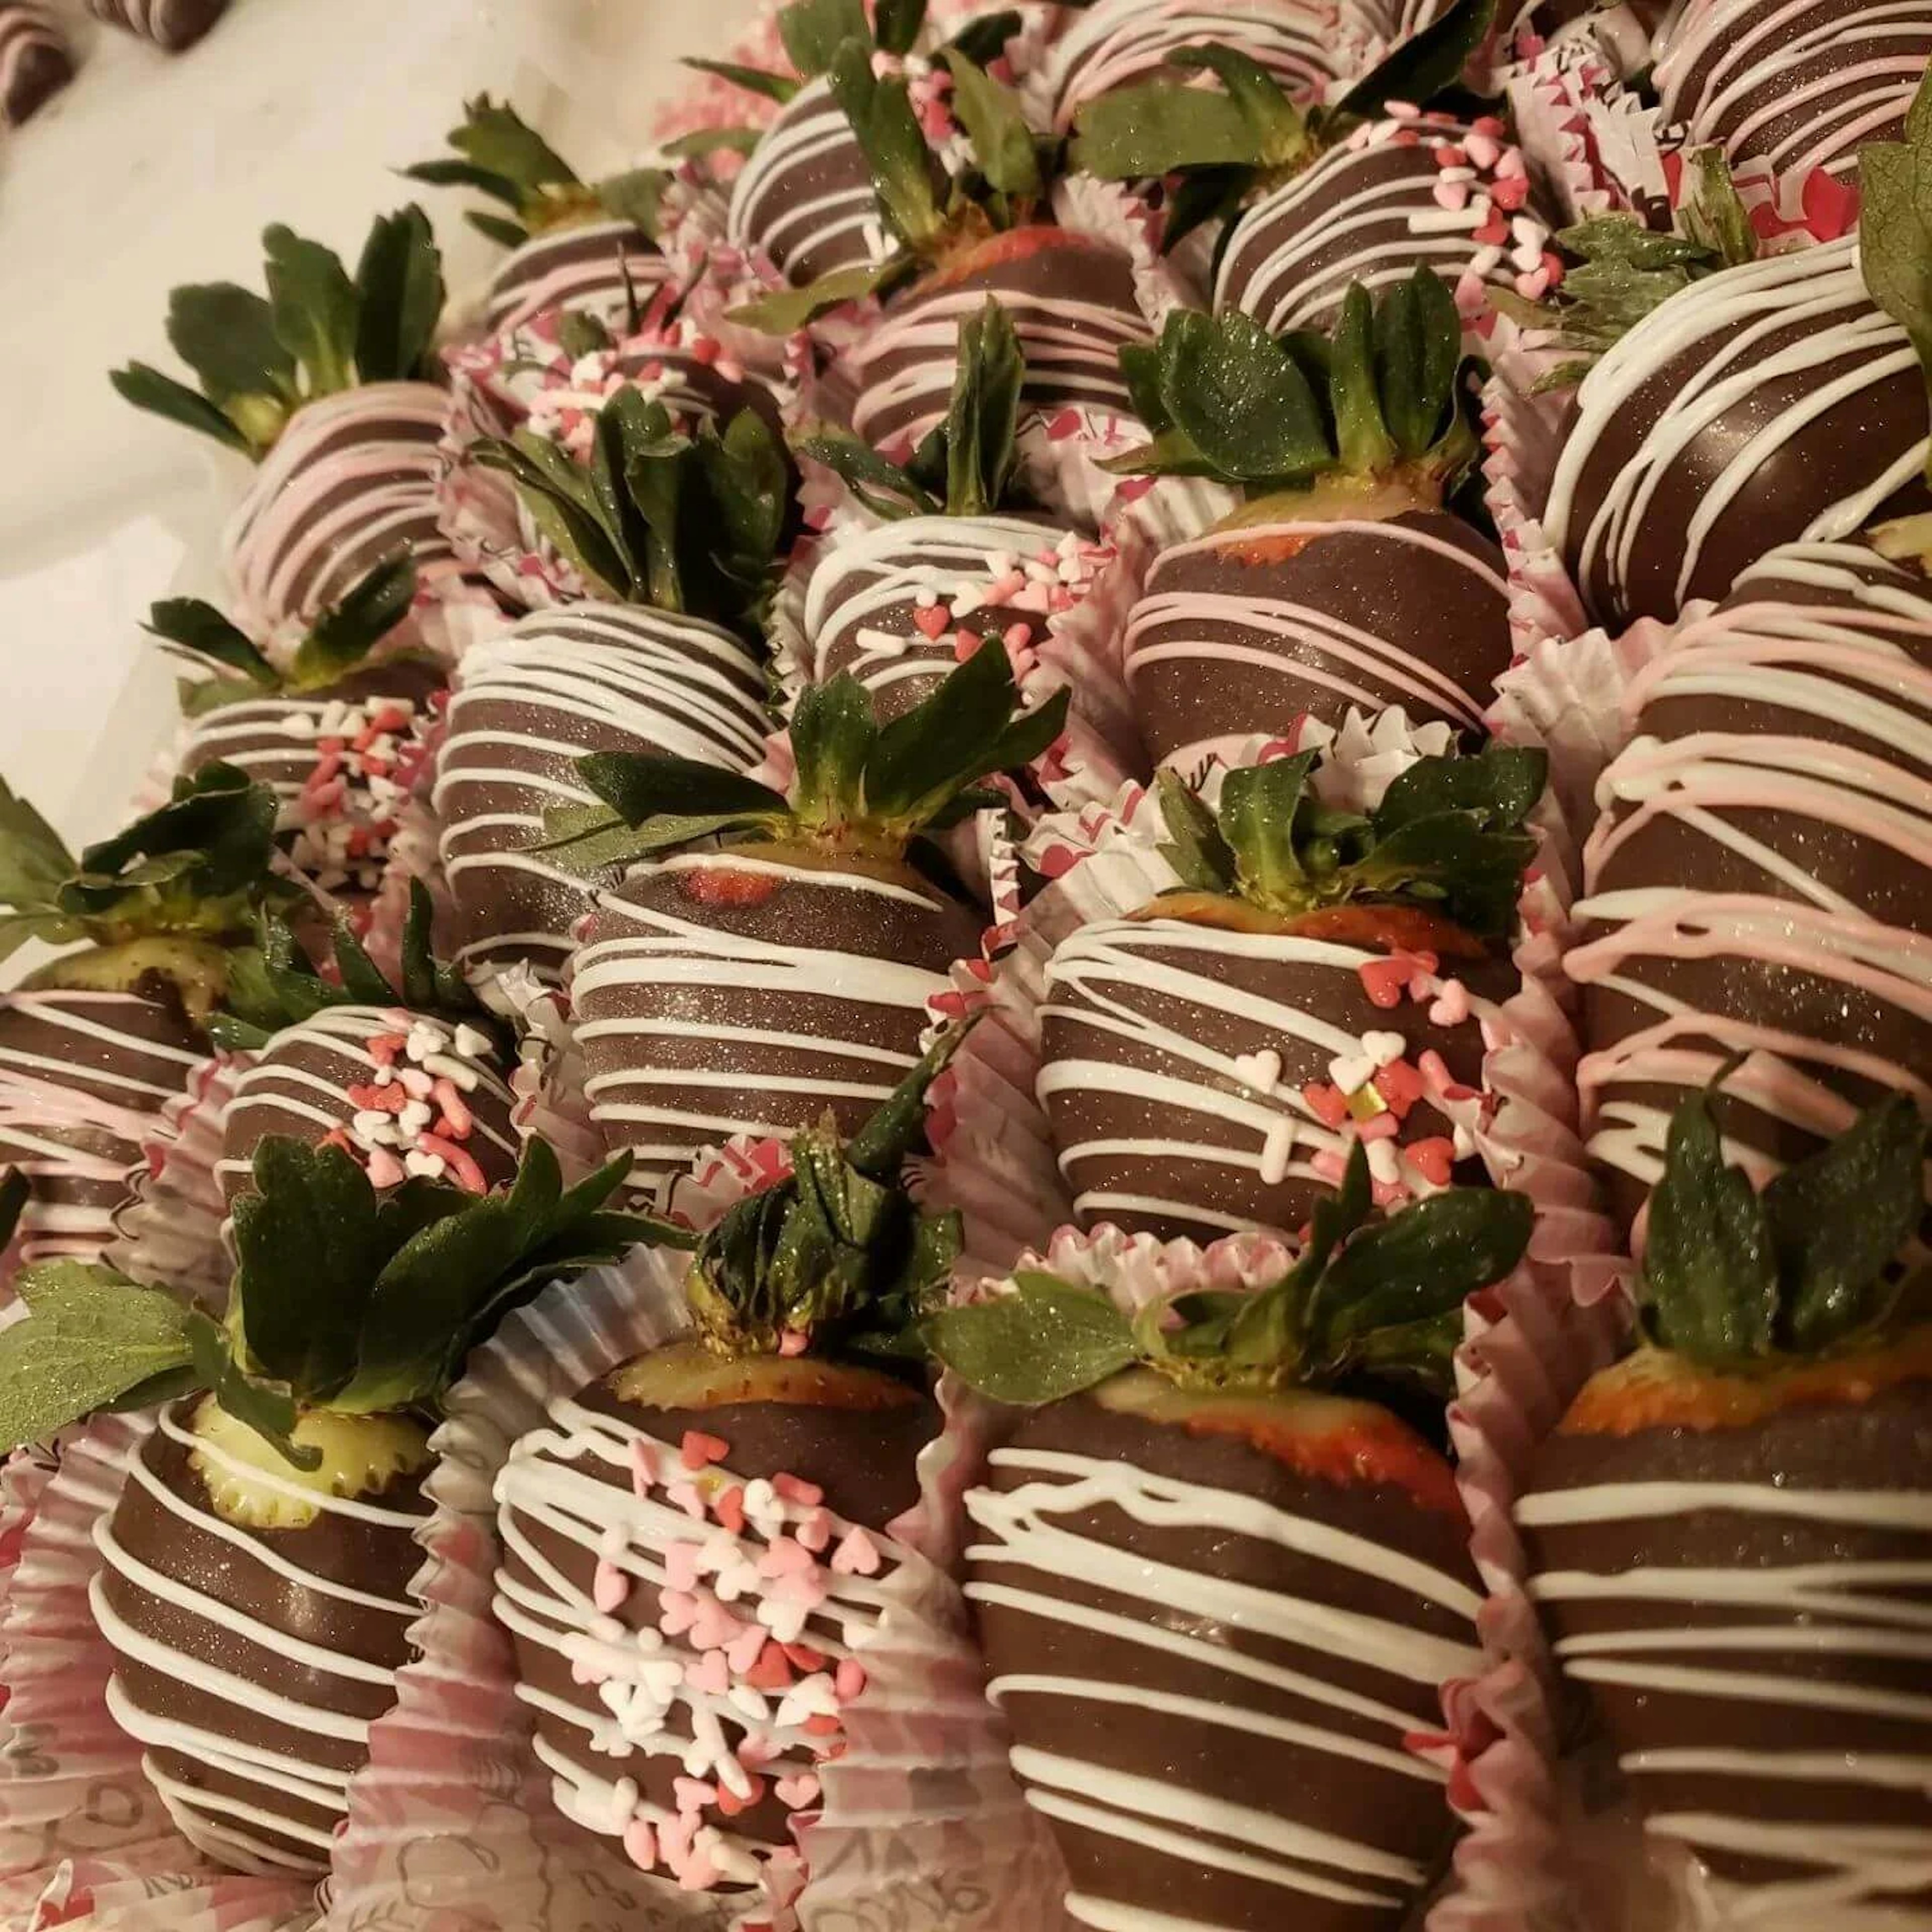 Chocolate strawberries covered with white chocolate drizzle.